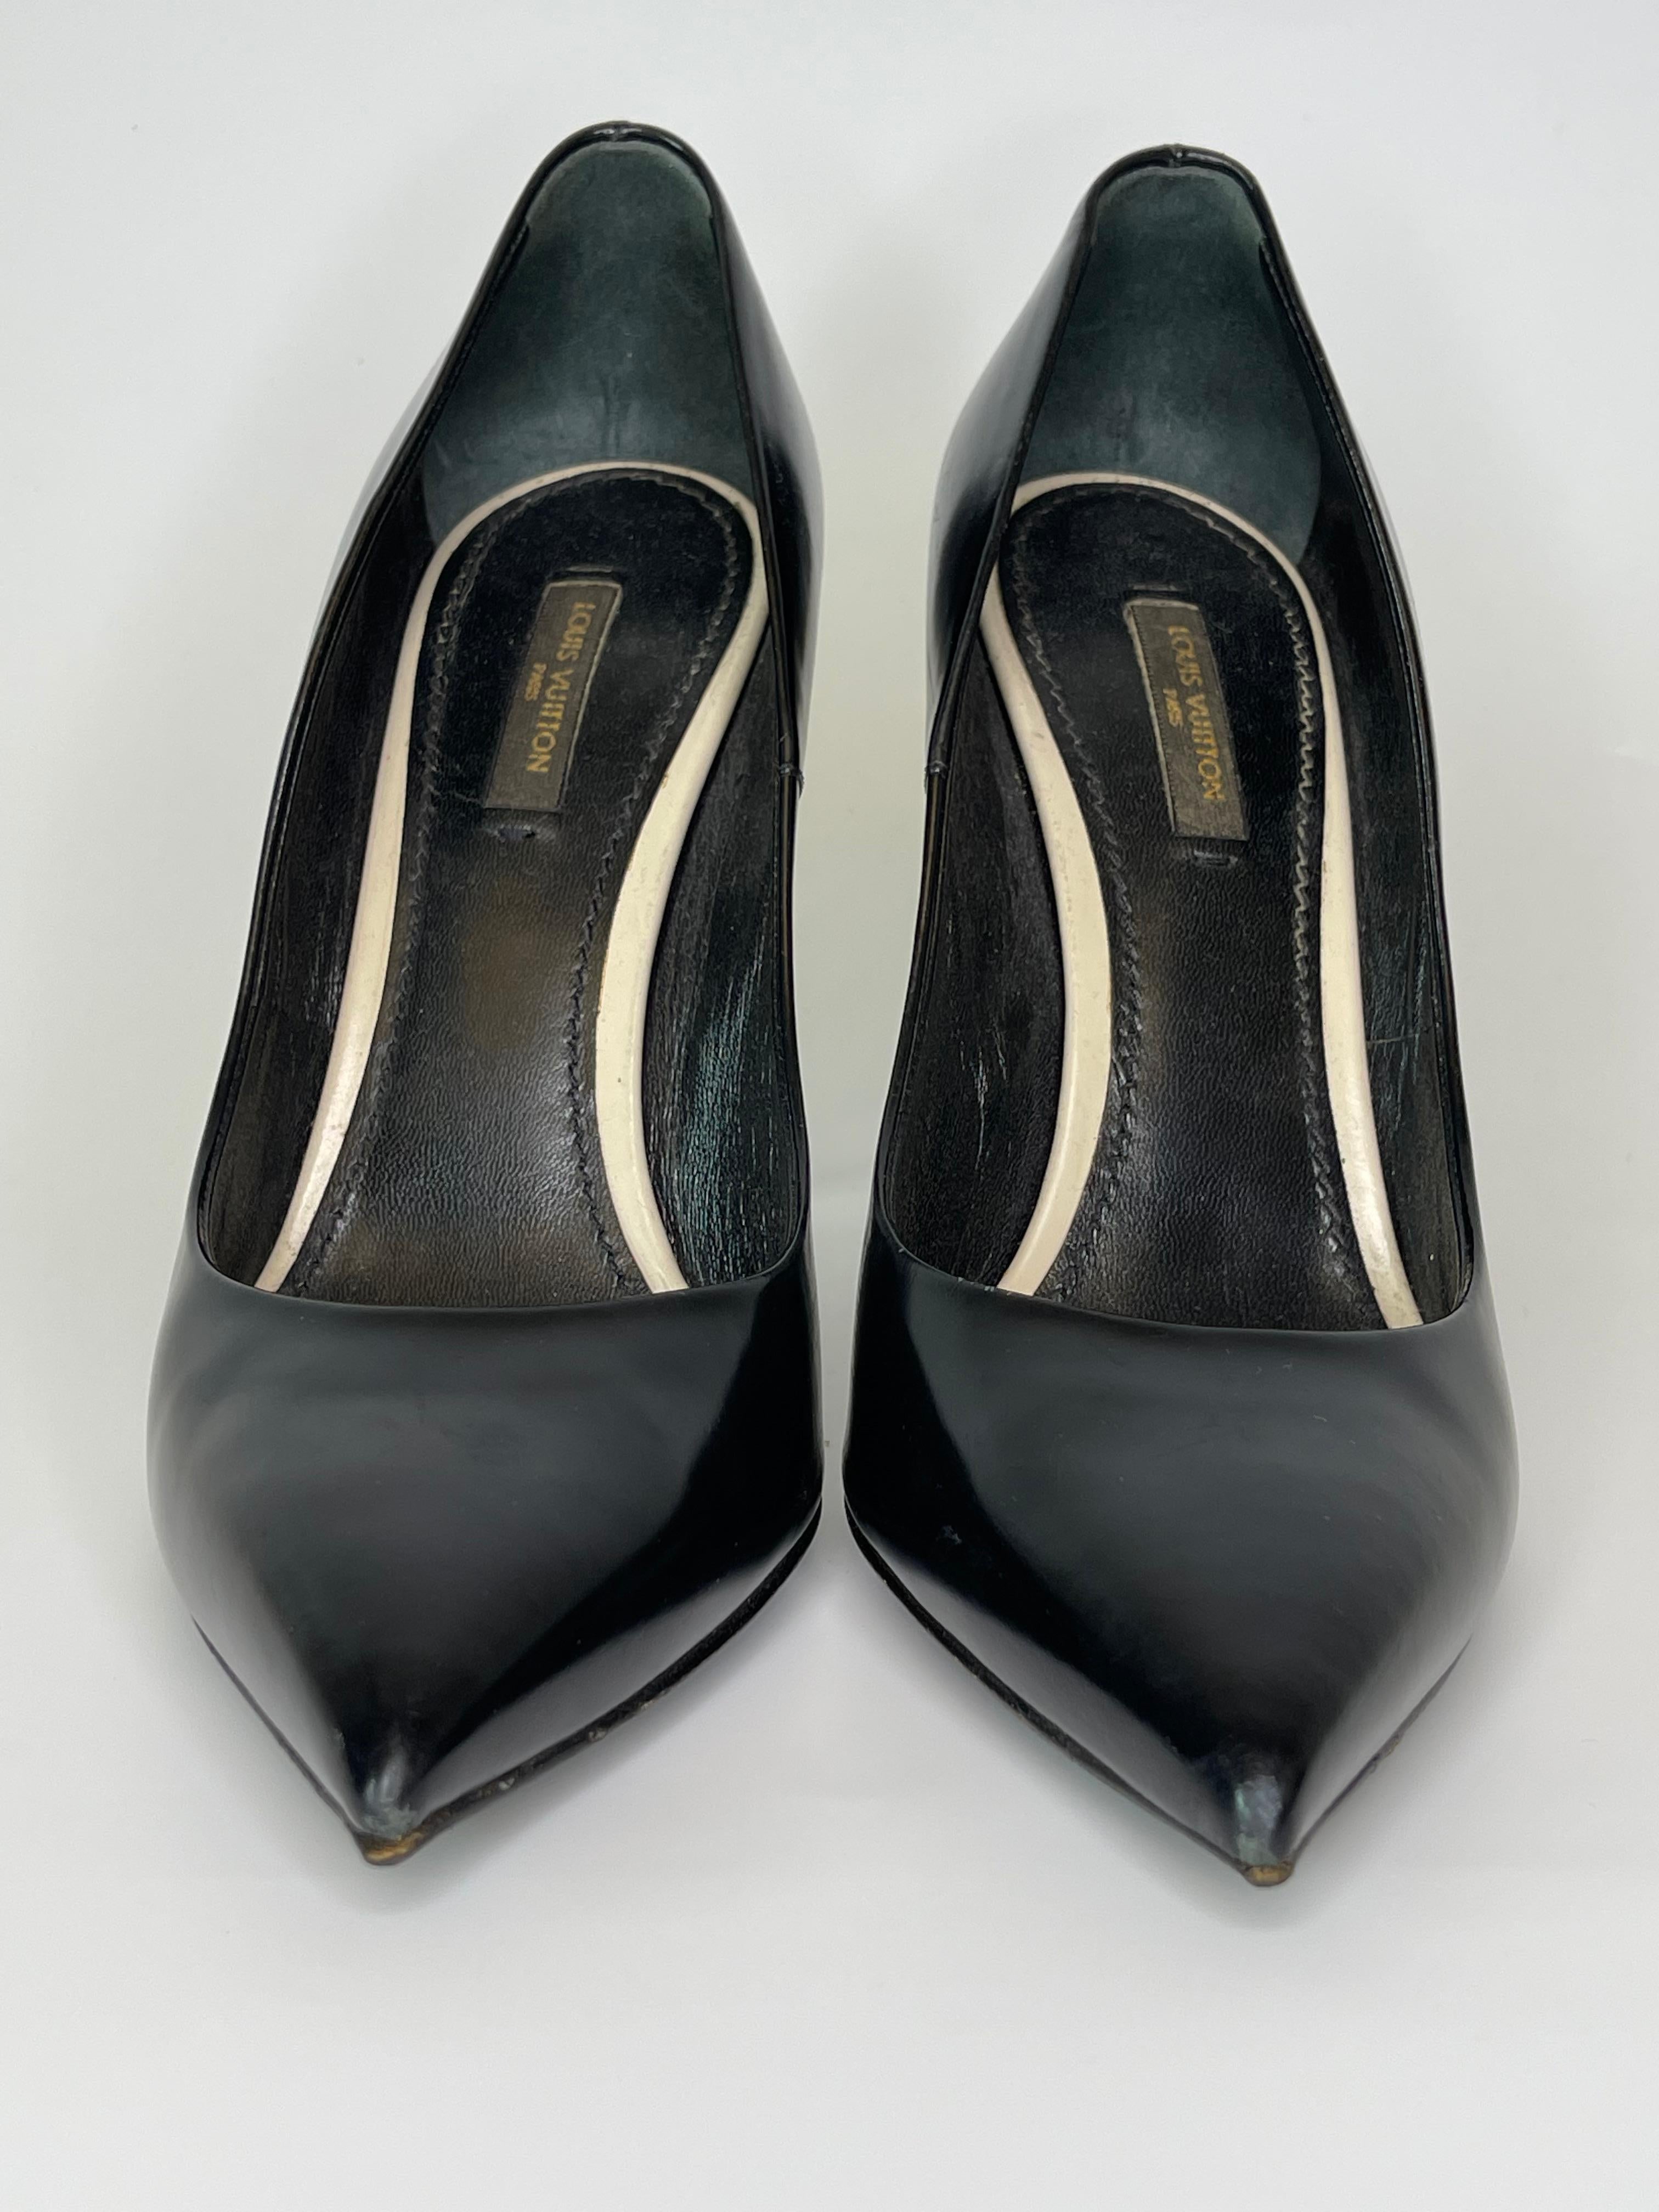 This Louis Vuitton heel consists of black patent leather, featuring a beautiful pointed toe. Good for easy slip on use. Gold metal trim with logo on the exterior, at the heel. Date code faded on the interior.

COLOR: Black
MATERIAL: Patient